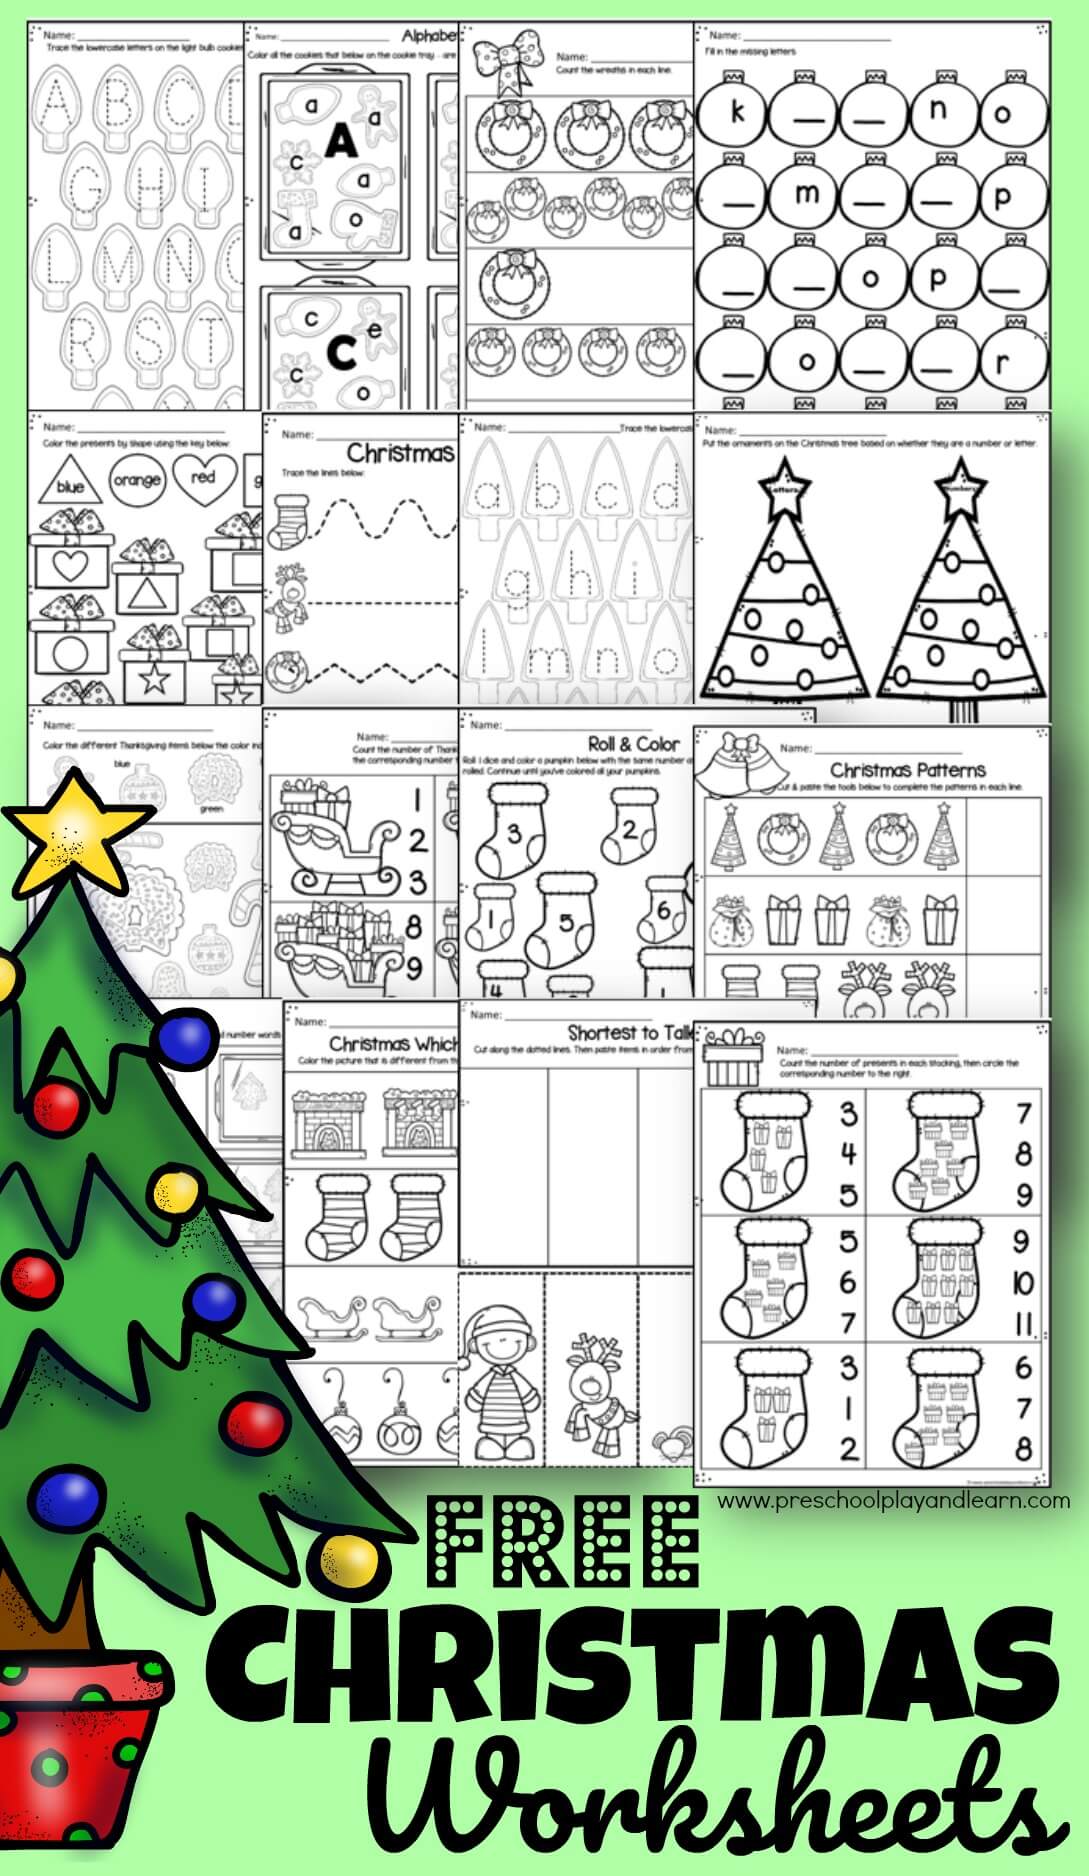 fun-and-educational-christmas-activities-for-preschoolers-printables